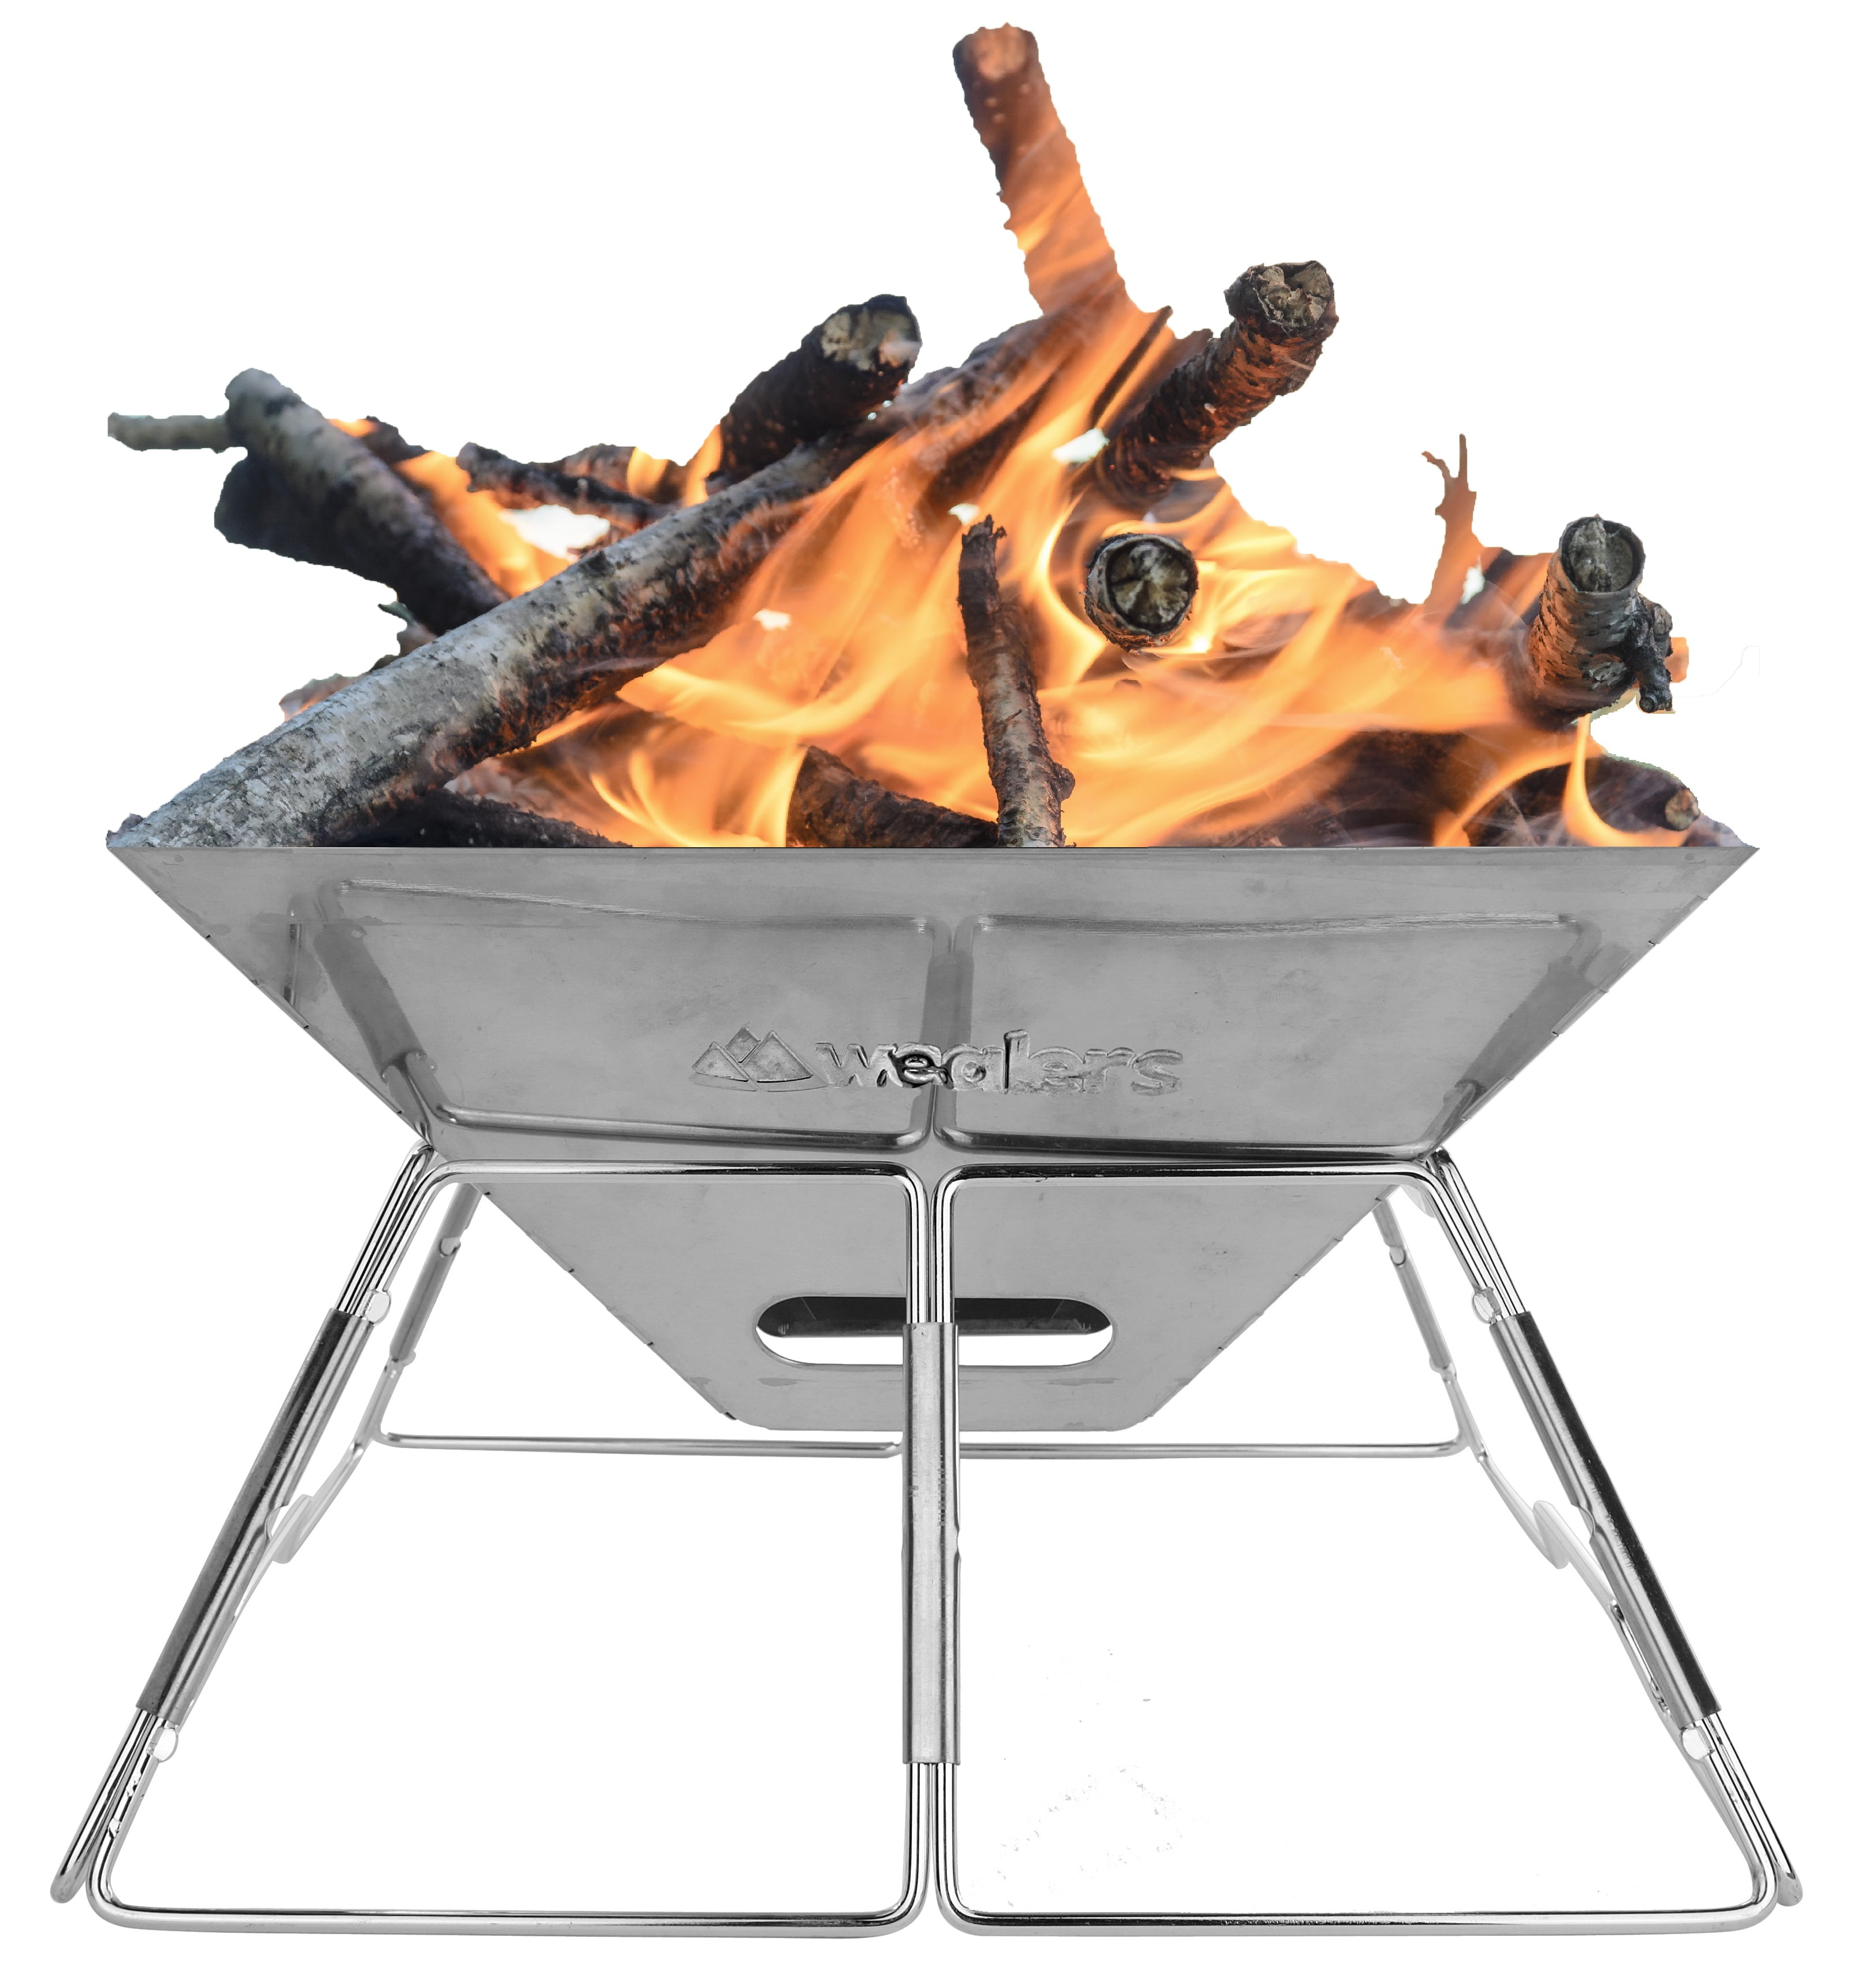 Wealers Compact Folding 16 Inch Fire Pit BBQ Grill Made From Stainless  Steel. Portable and Great for Camping, Picnics, Backpacking, Backyards, 